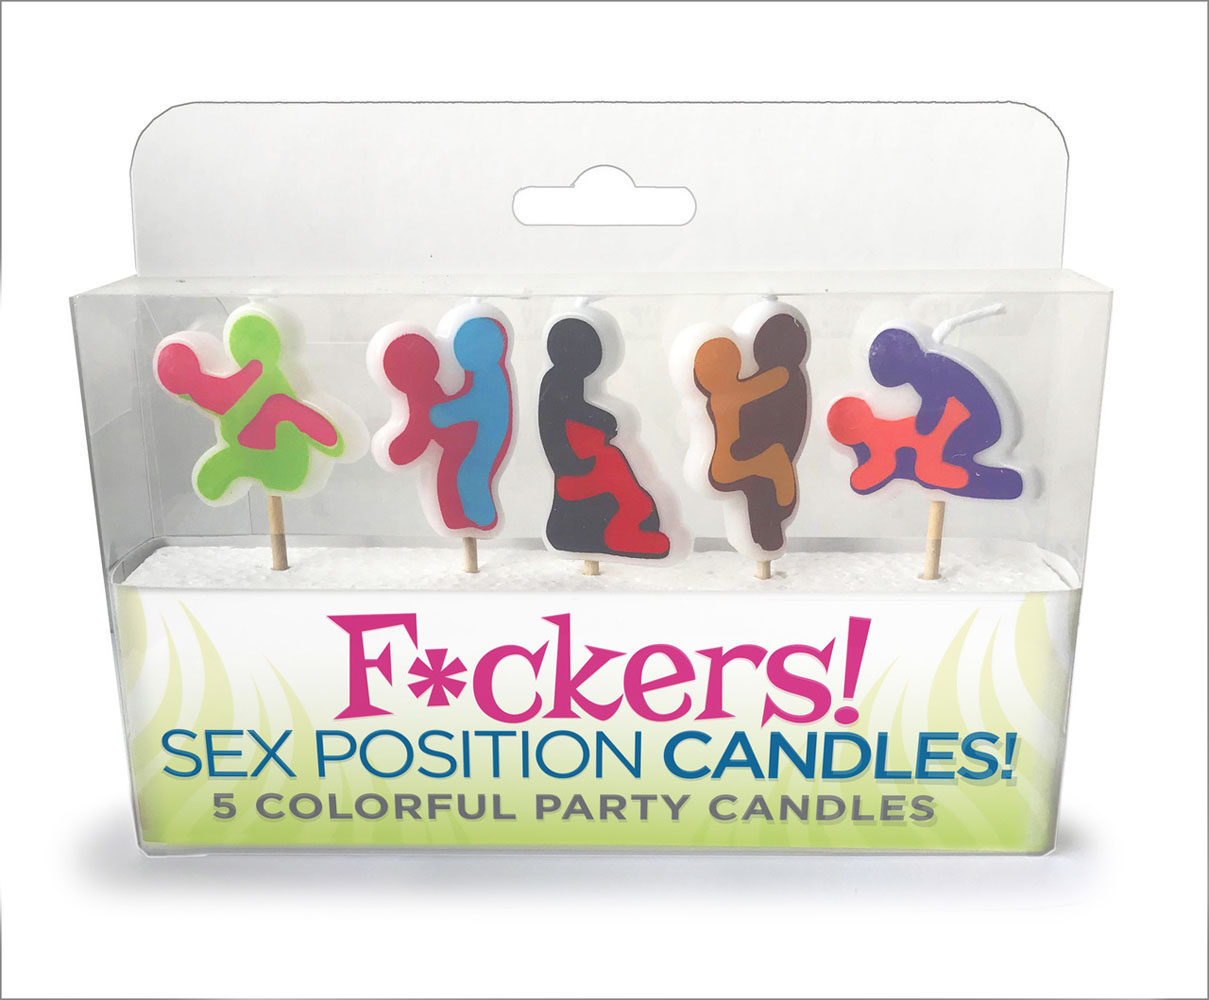 Sex Position Candles Pack of 5